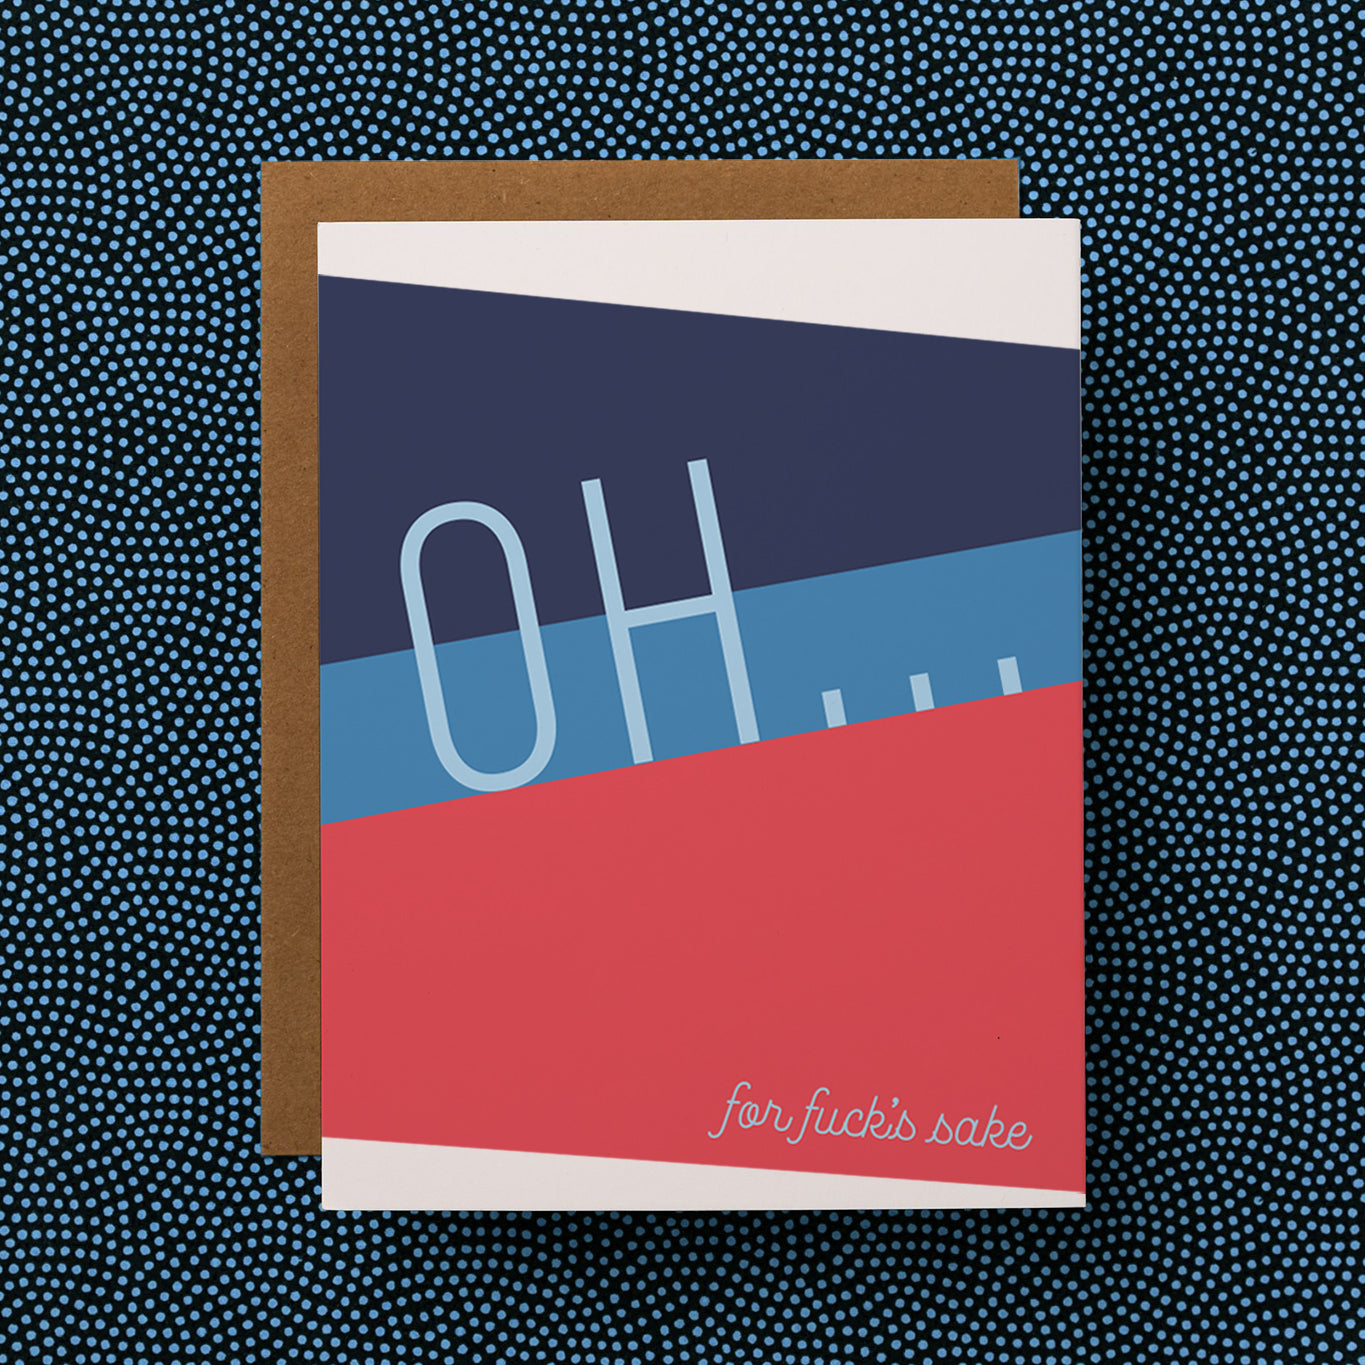 A unique and funny sympathy greeting card that reads "Oh... for fuck's sake"